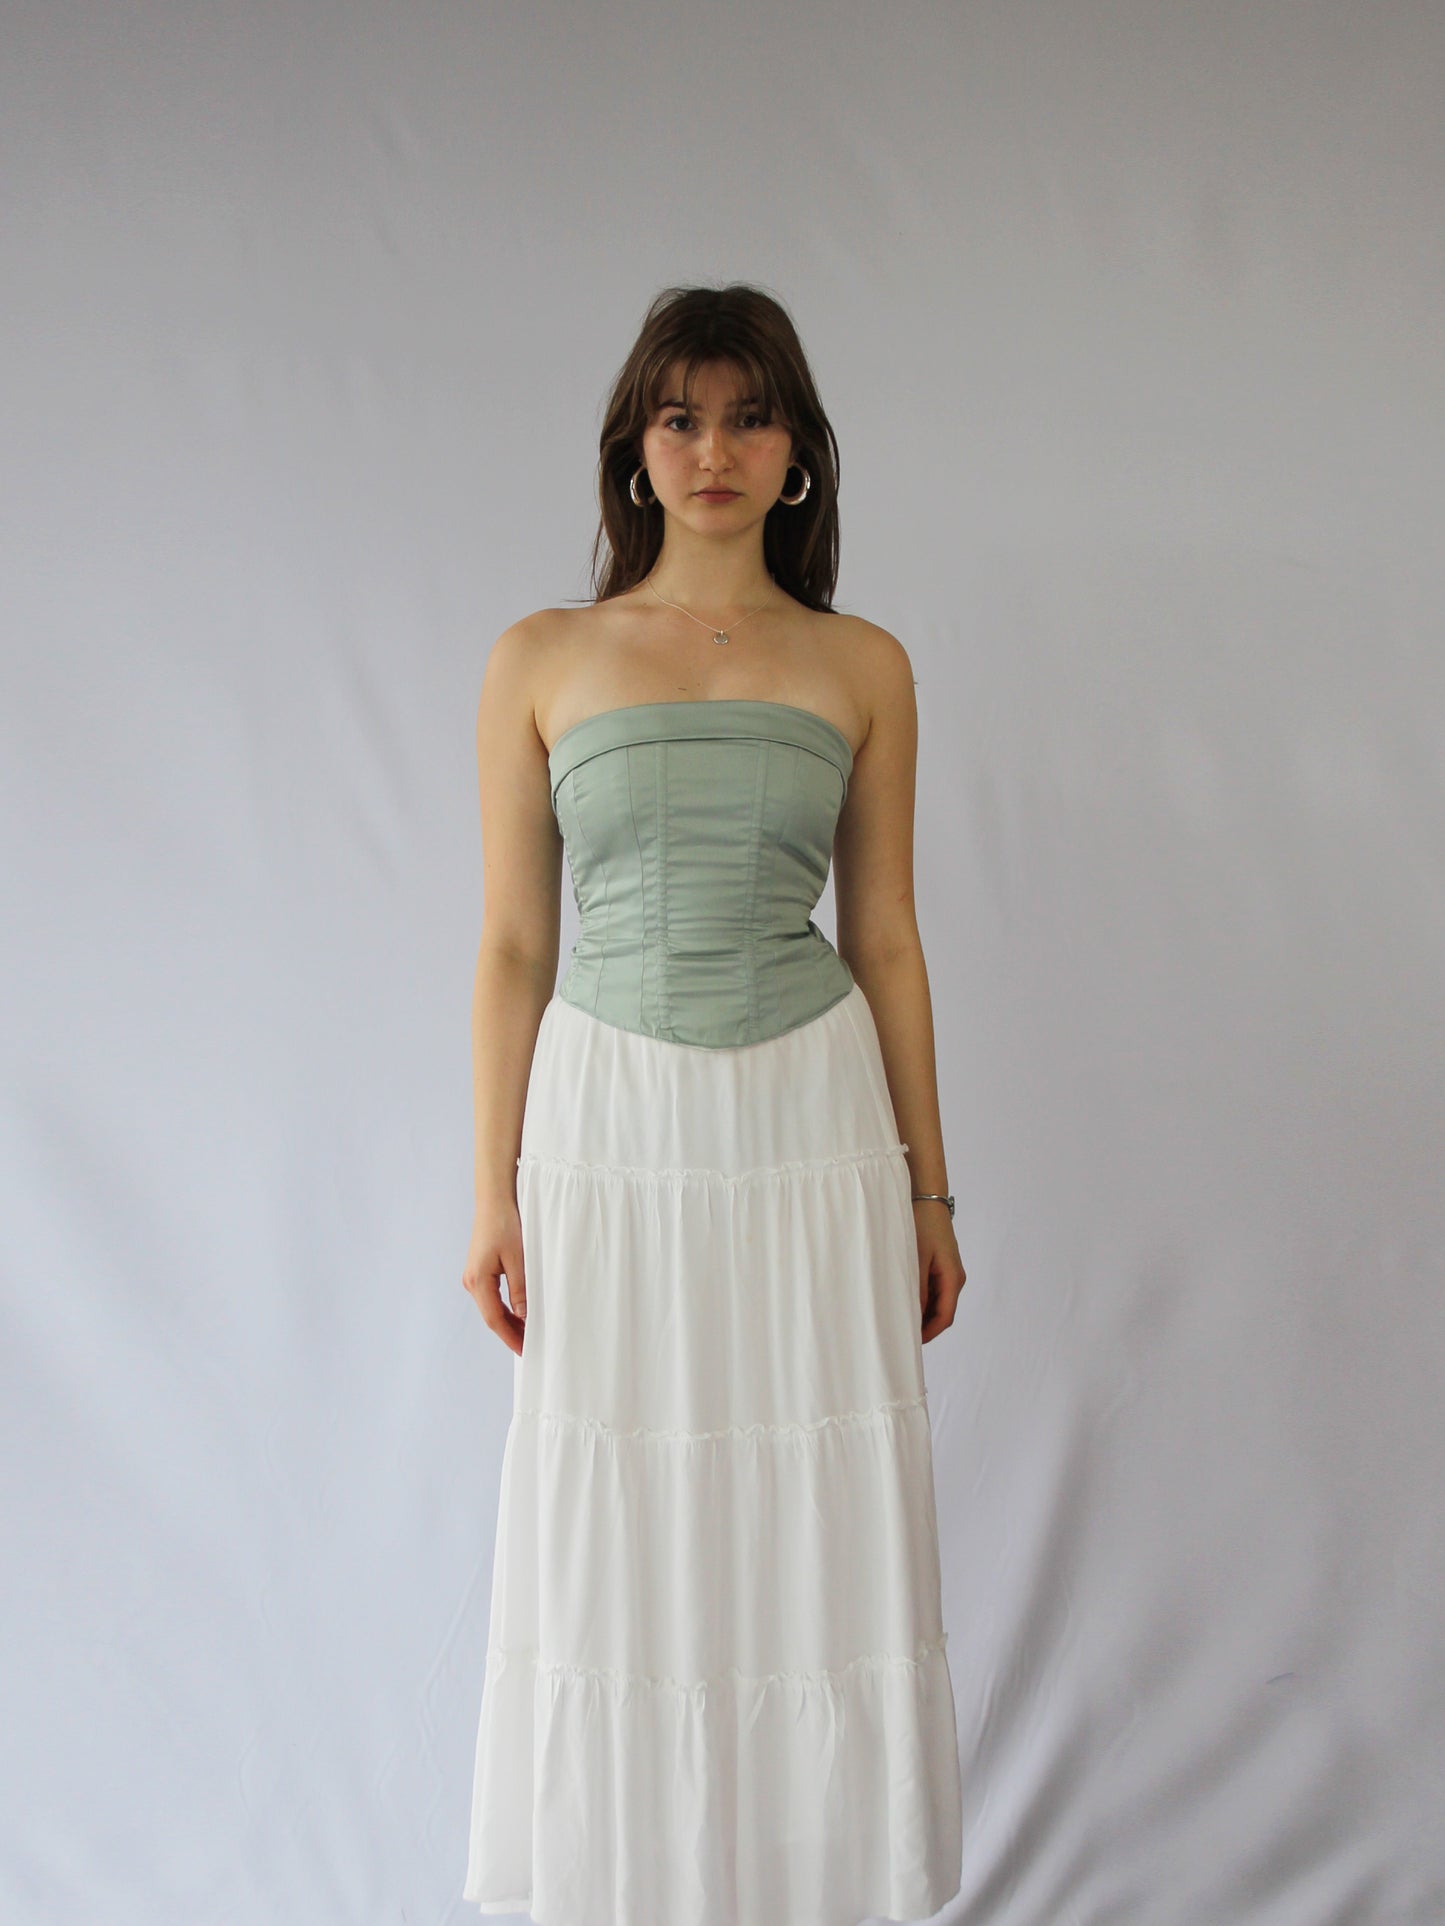 Corset Strapless solid colors